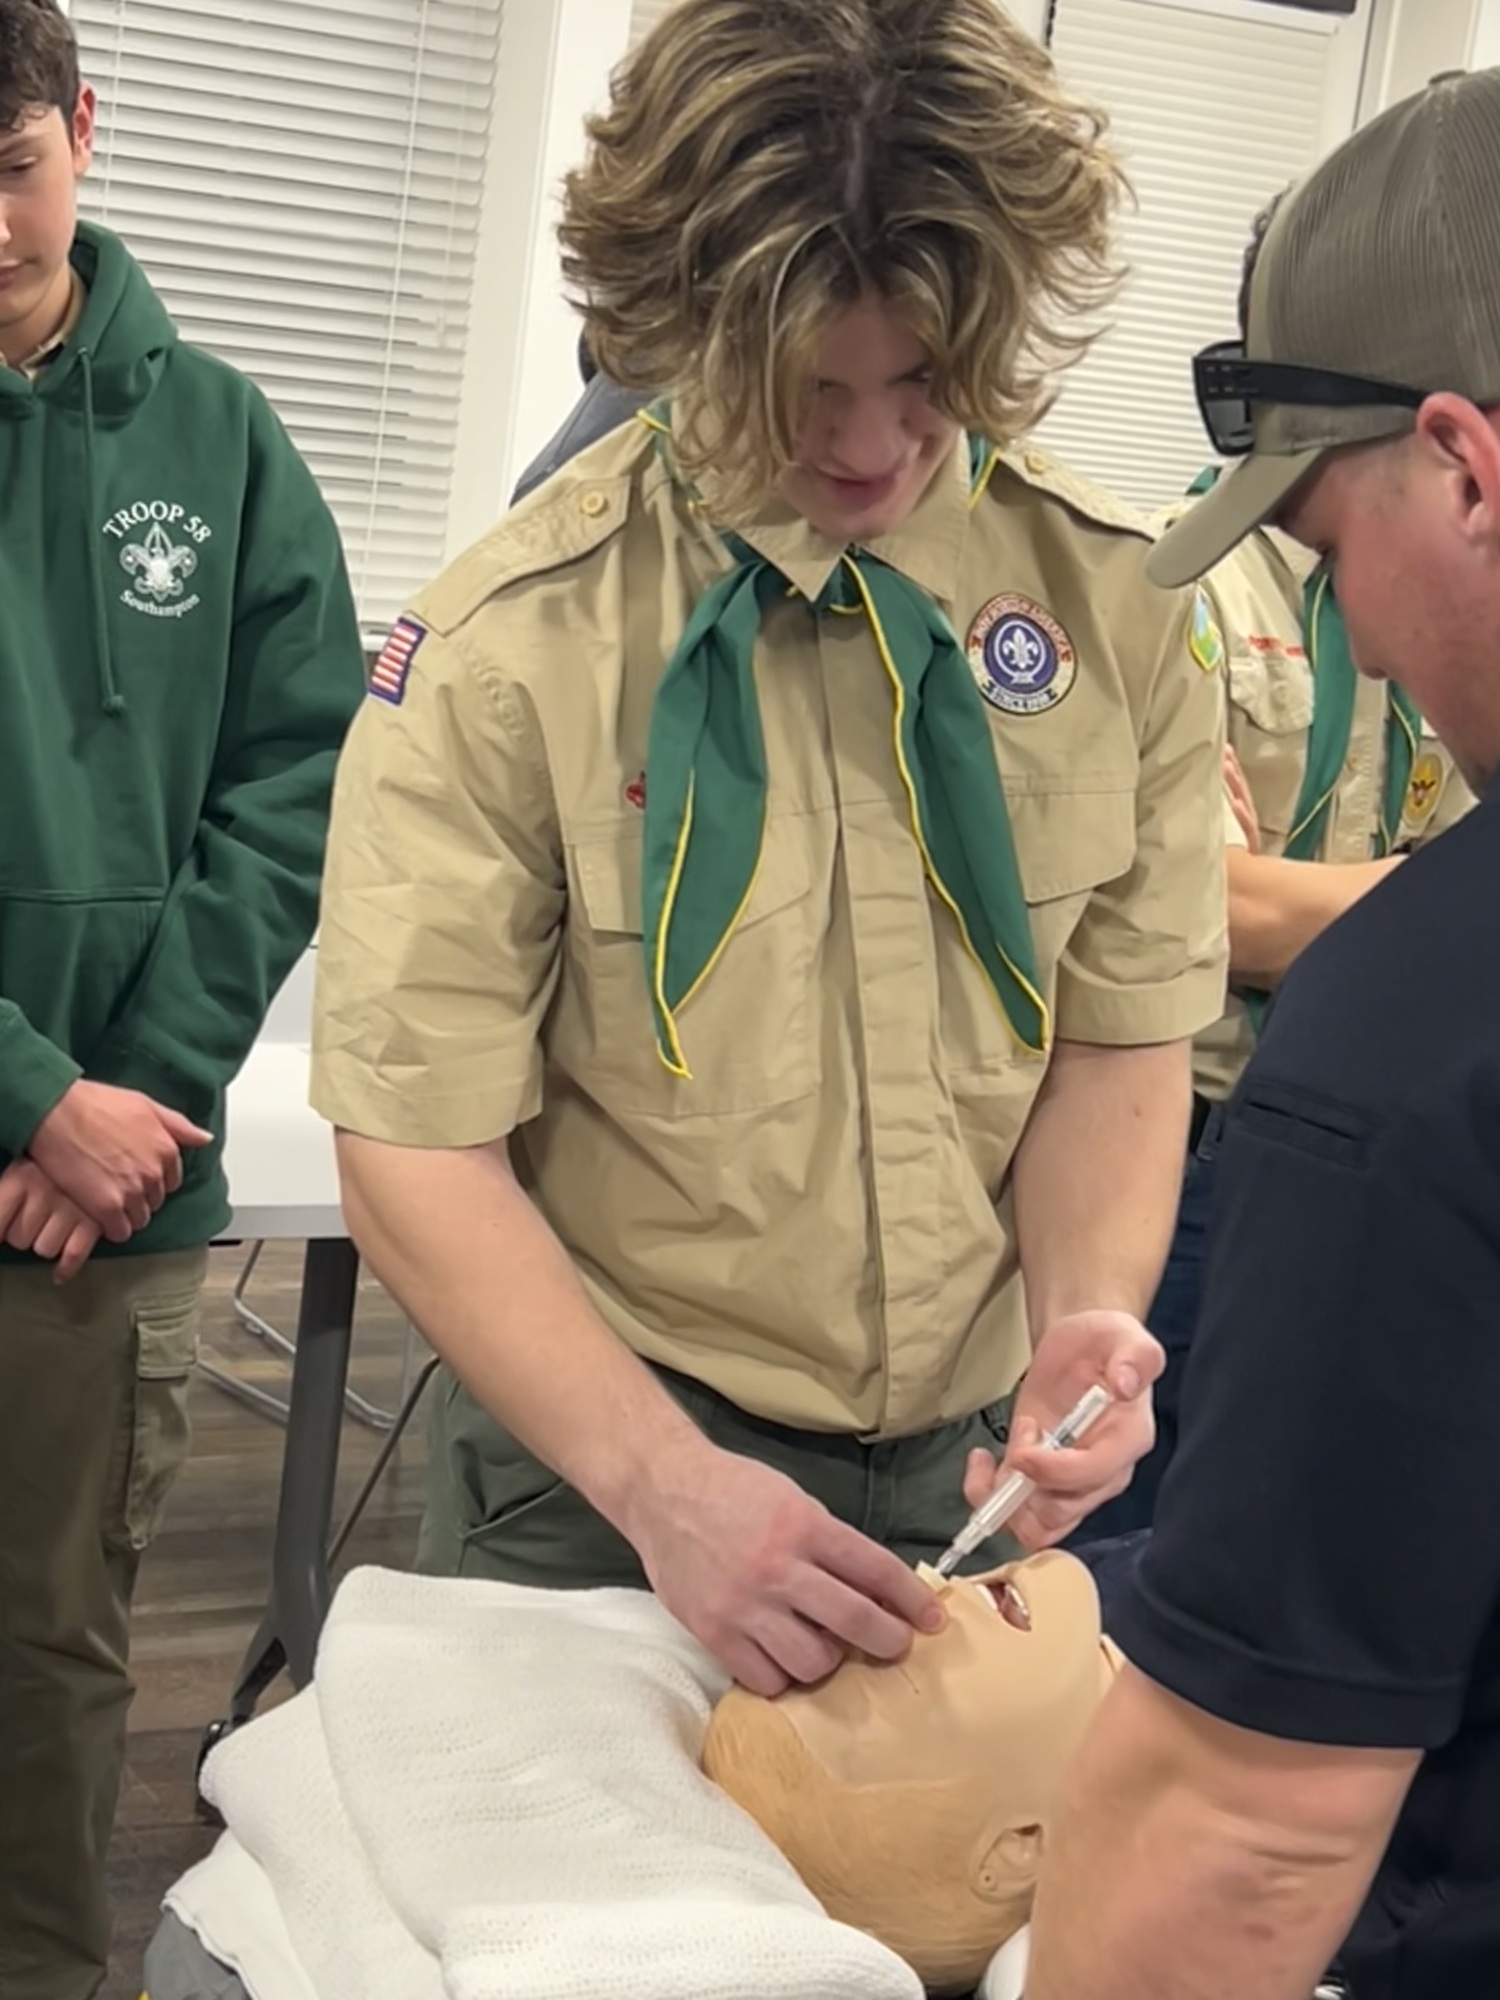 Scouts from Troop 58 in Southampton learned about the dangers of drugs and how to save a life using Narcan from Southampton Village Ambulance Chief Kyle McGuinness during a recent  visit to Southampton Village Volunteer Ambulance headquarters. COURTESY TROOP 58